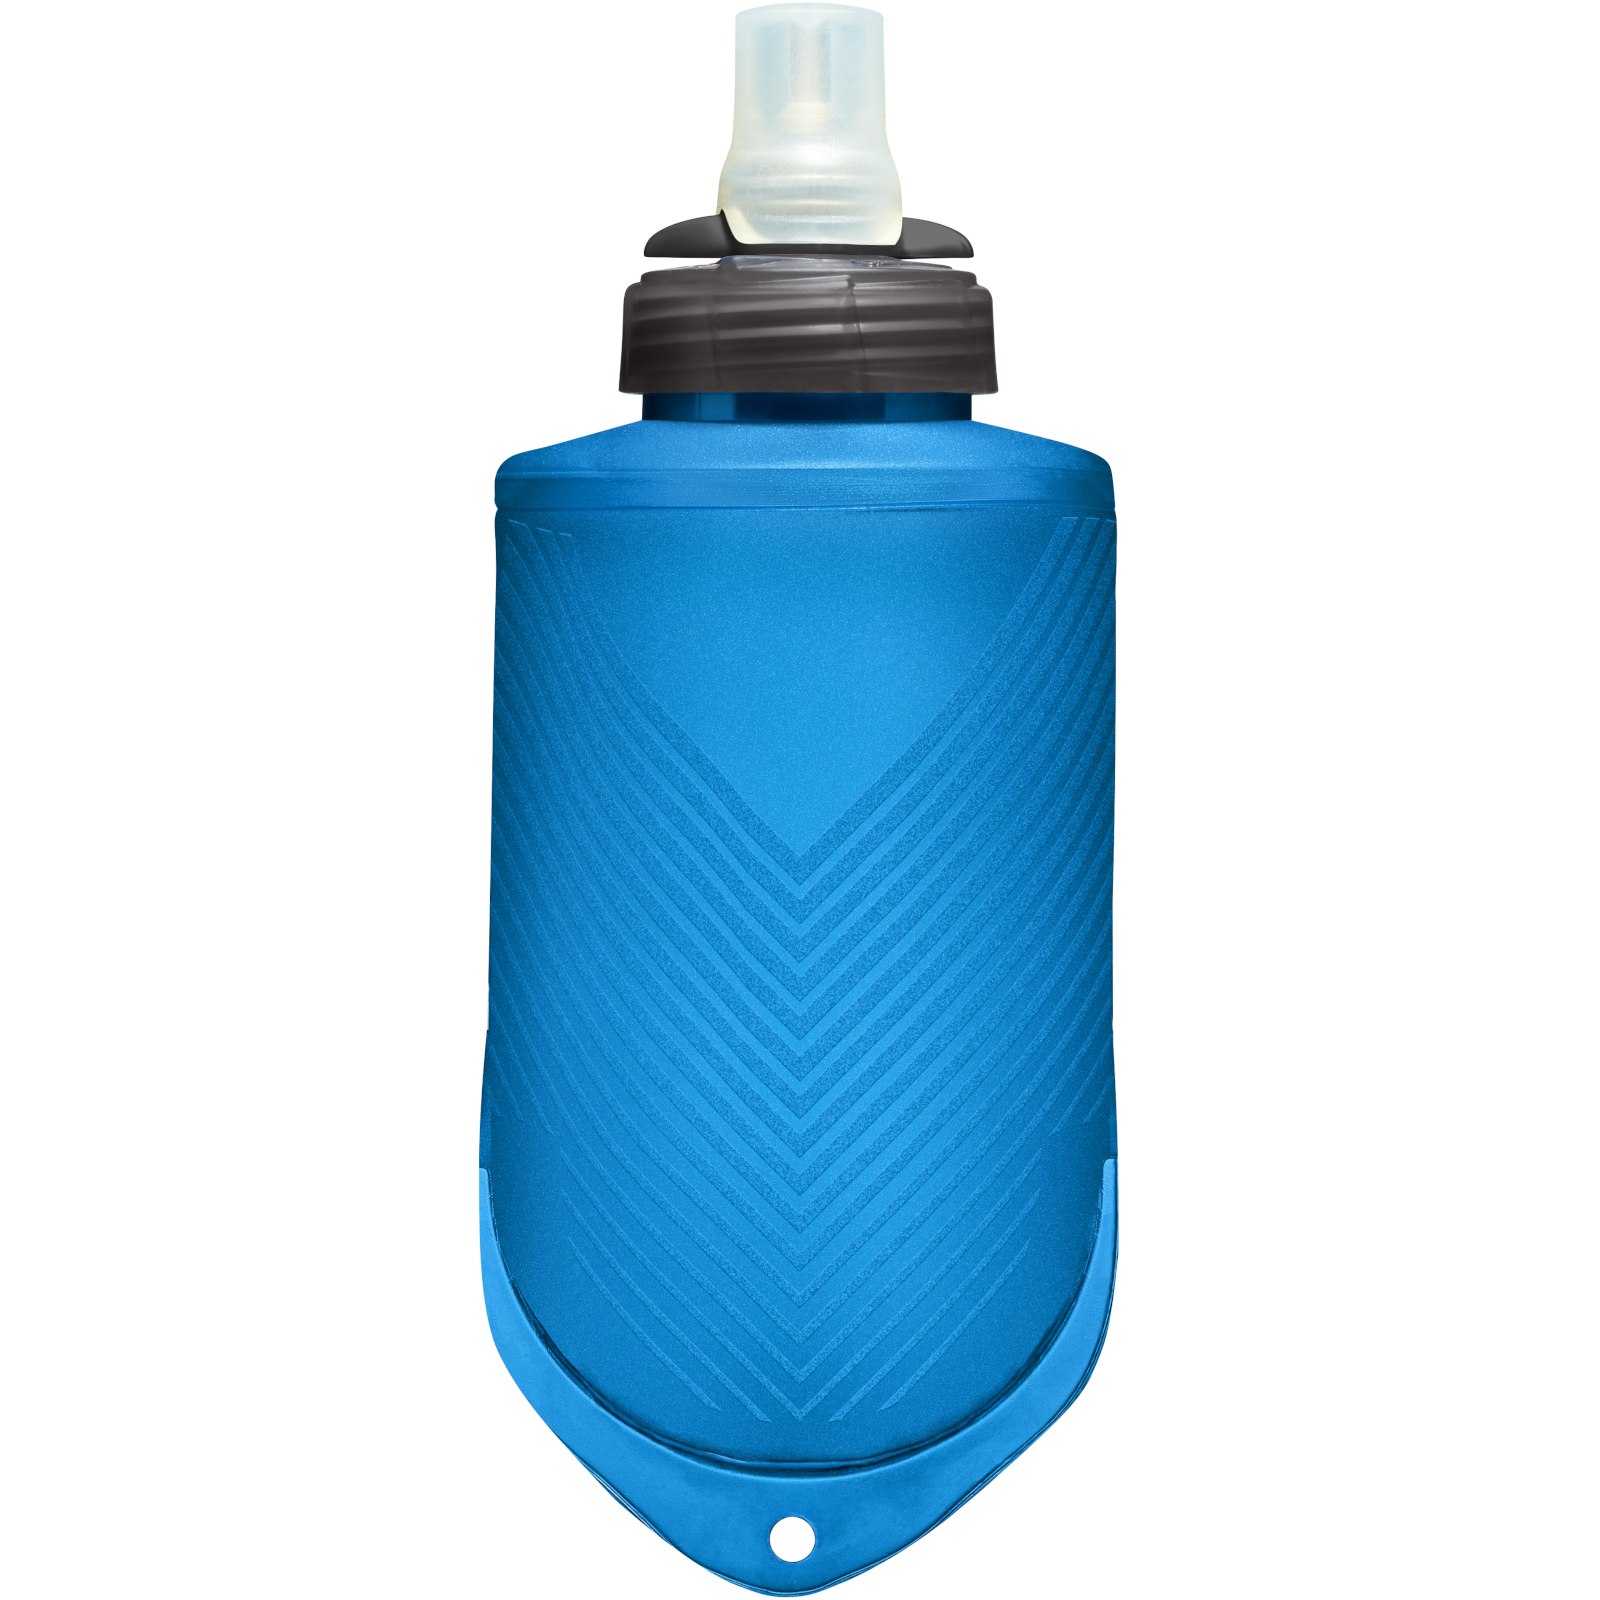 Image of CamelBak Quick Stow Flask Bottle 355ml - Blue